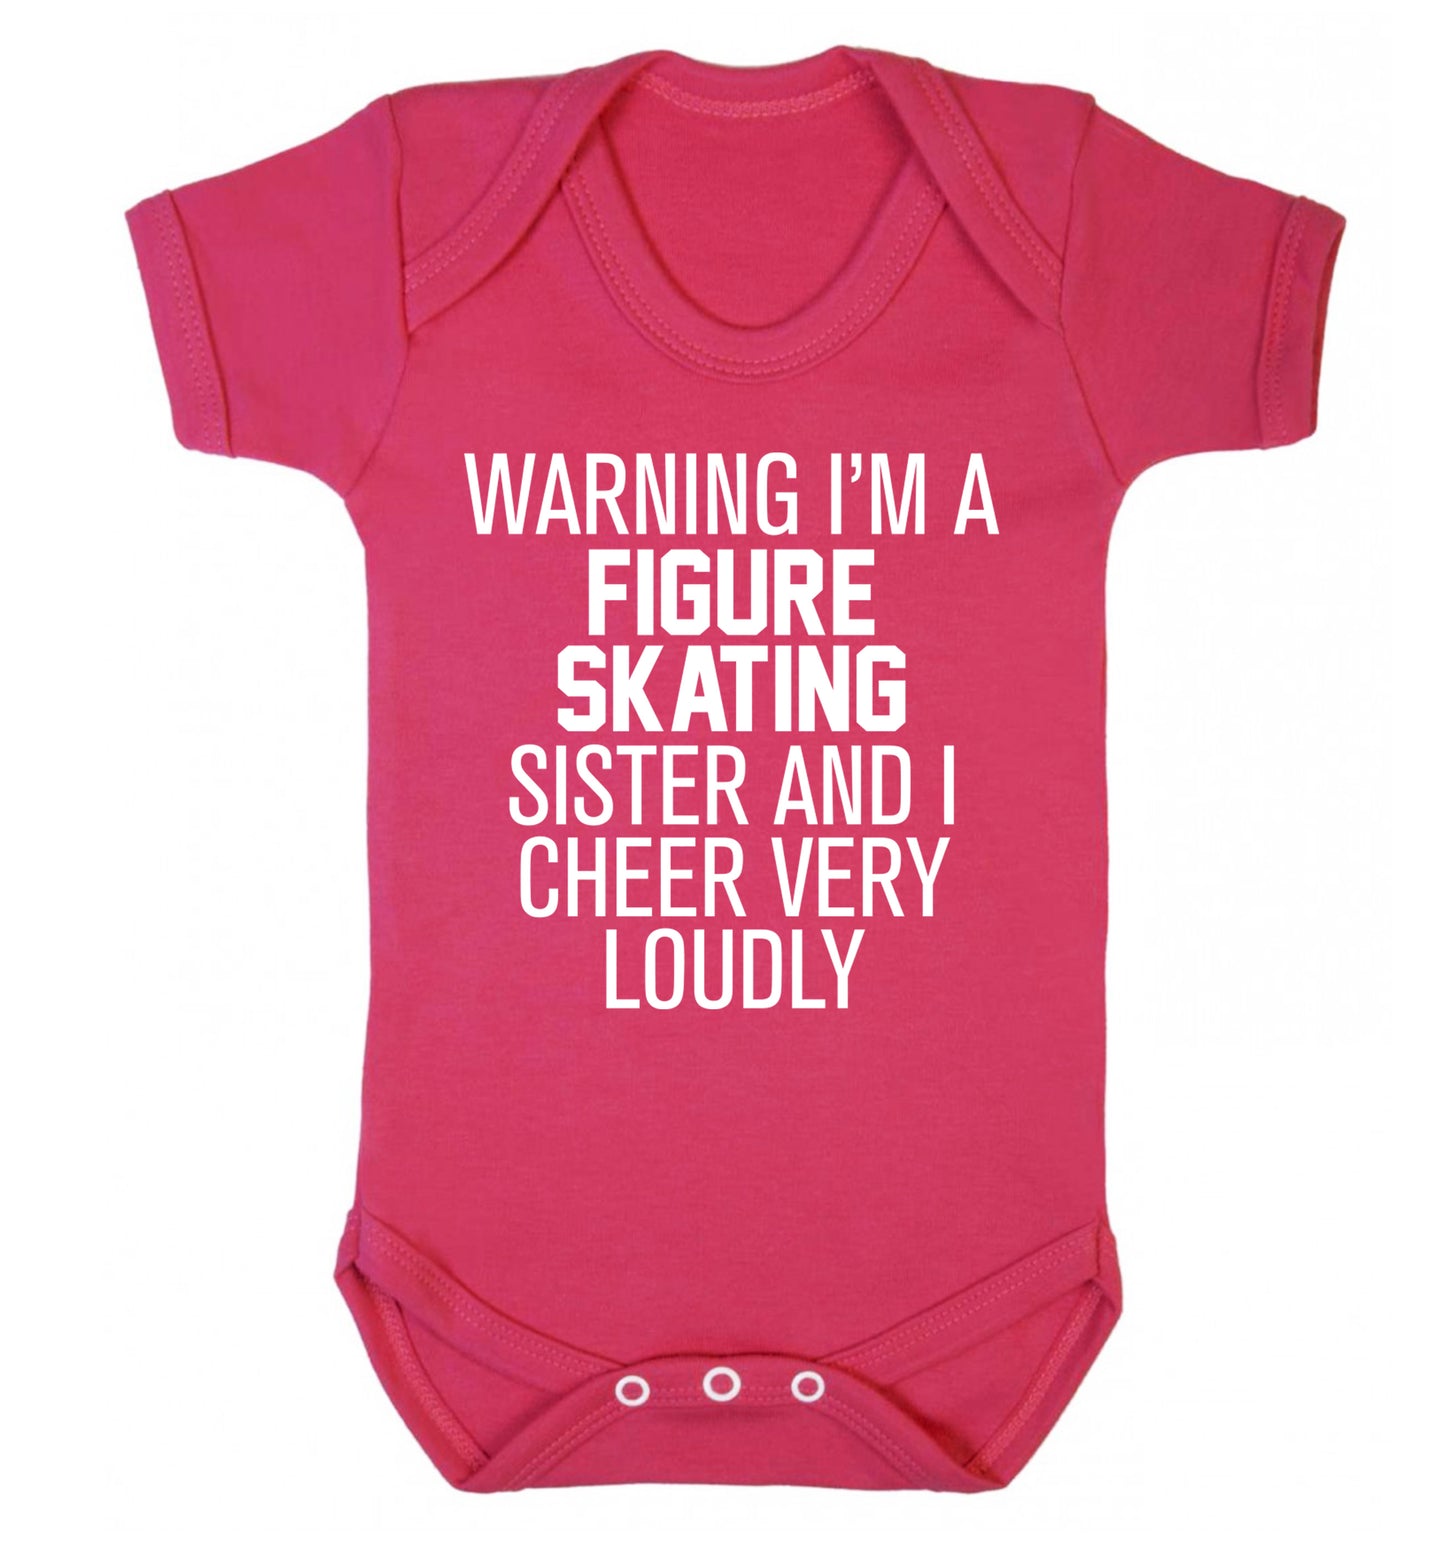 Warning I'm a figure skating sister and I cheer very loudly Baby Vest dark pink 18-24 months